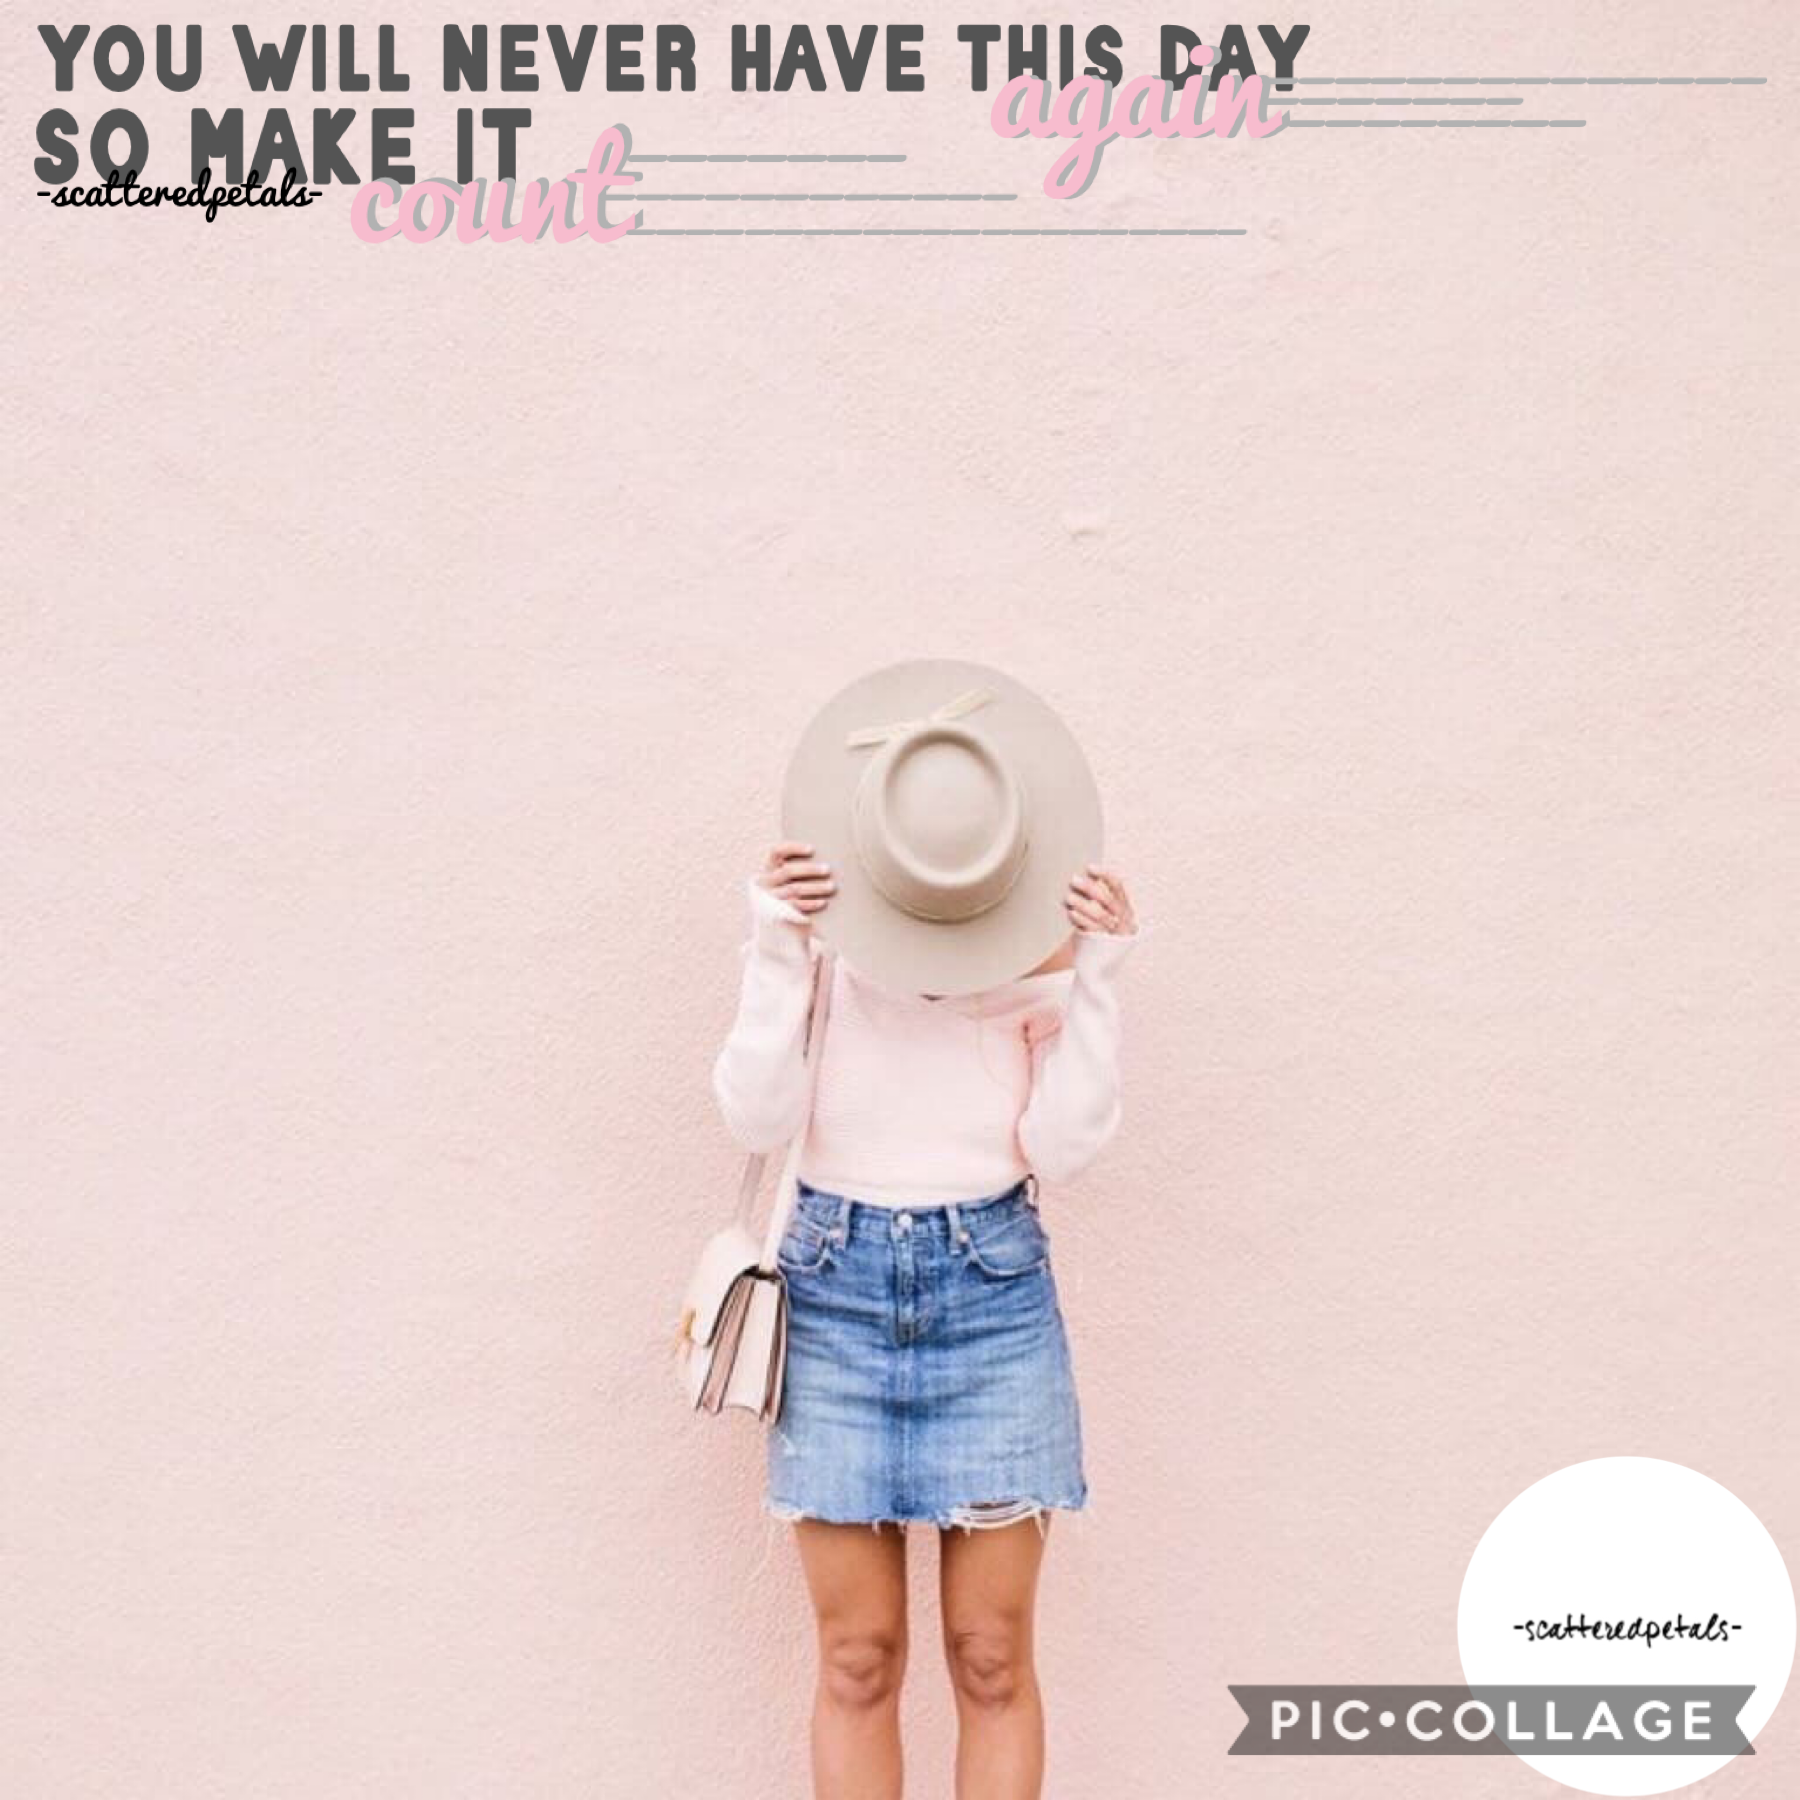 Tap
What do you think?
Quote “You will never have this day again so make it count”
7/21/20

Enjoy